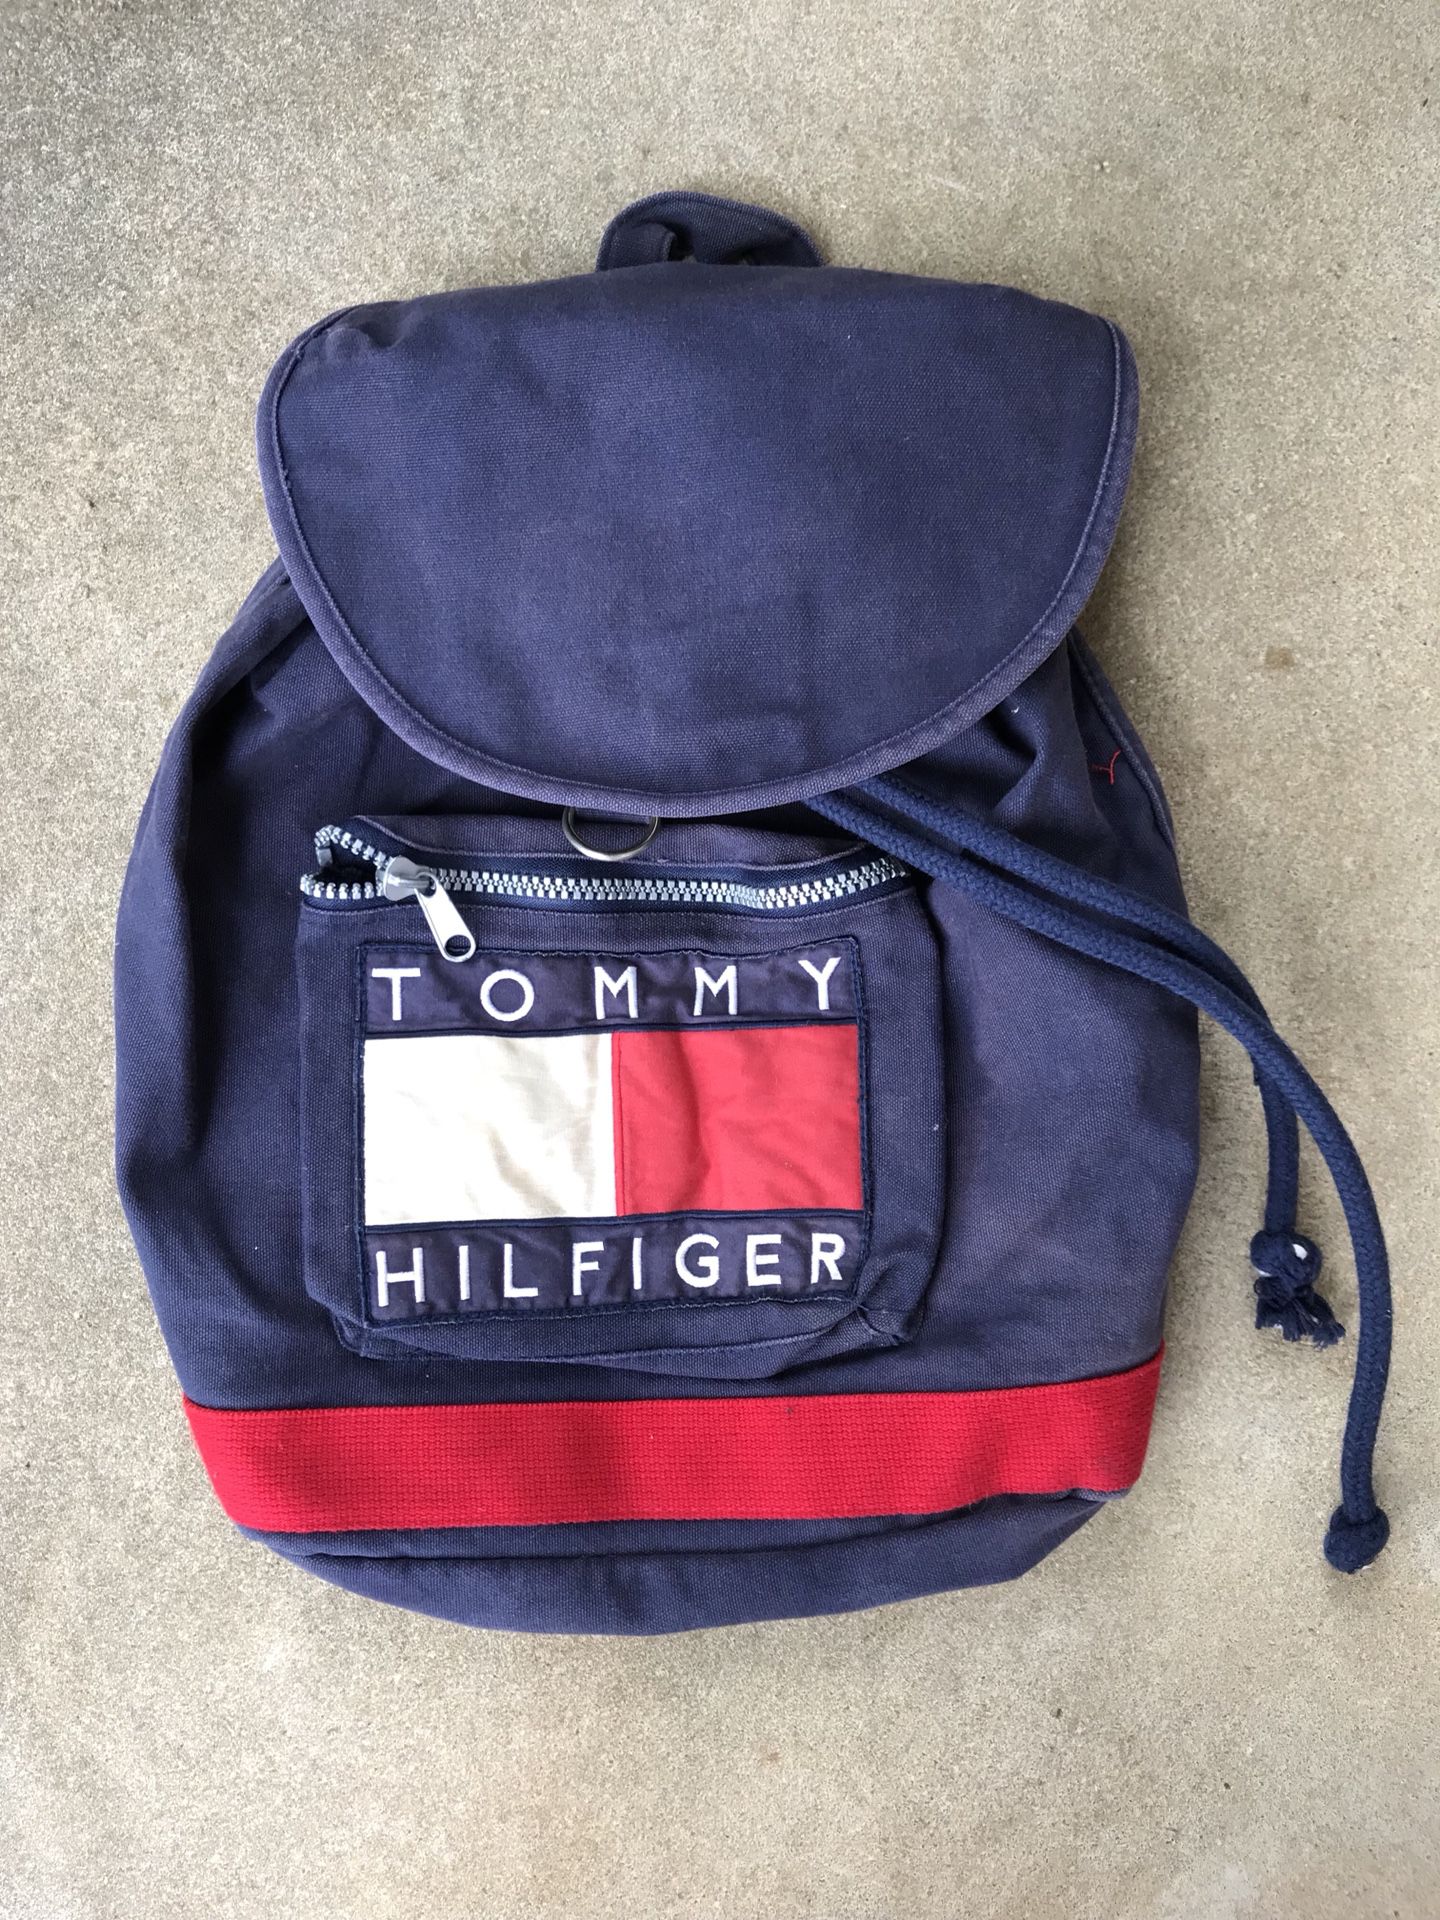 emocional átomo pasillo Vintage Tommy Hilfiger Backpack for Sale in Matthews, NC - OfferUp